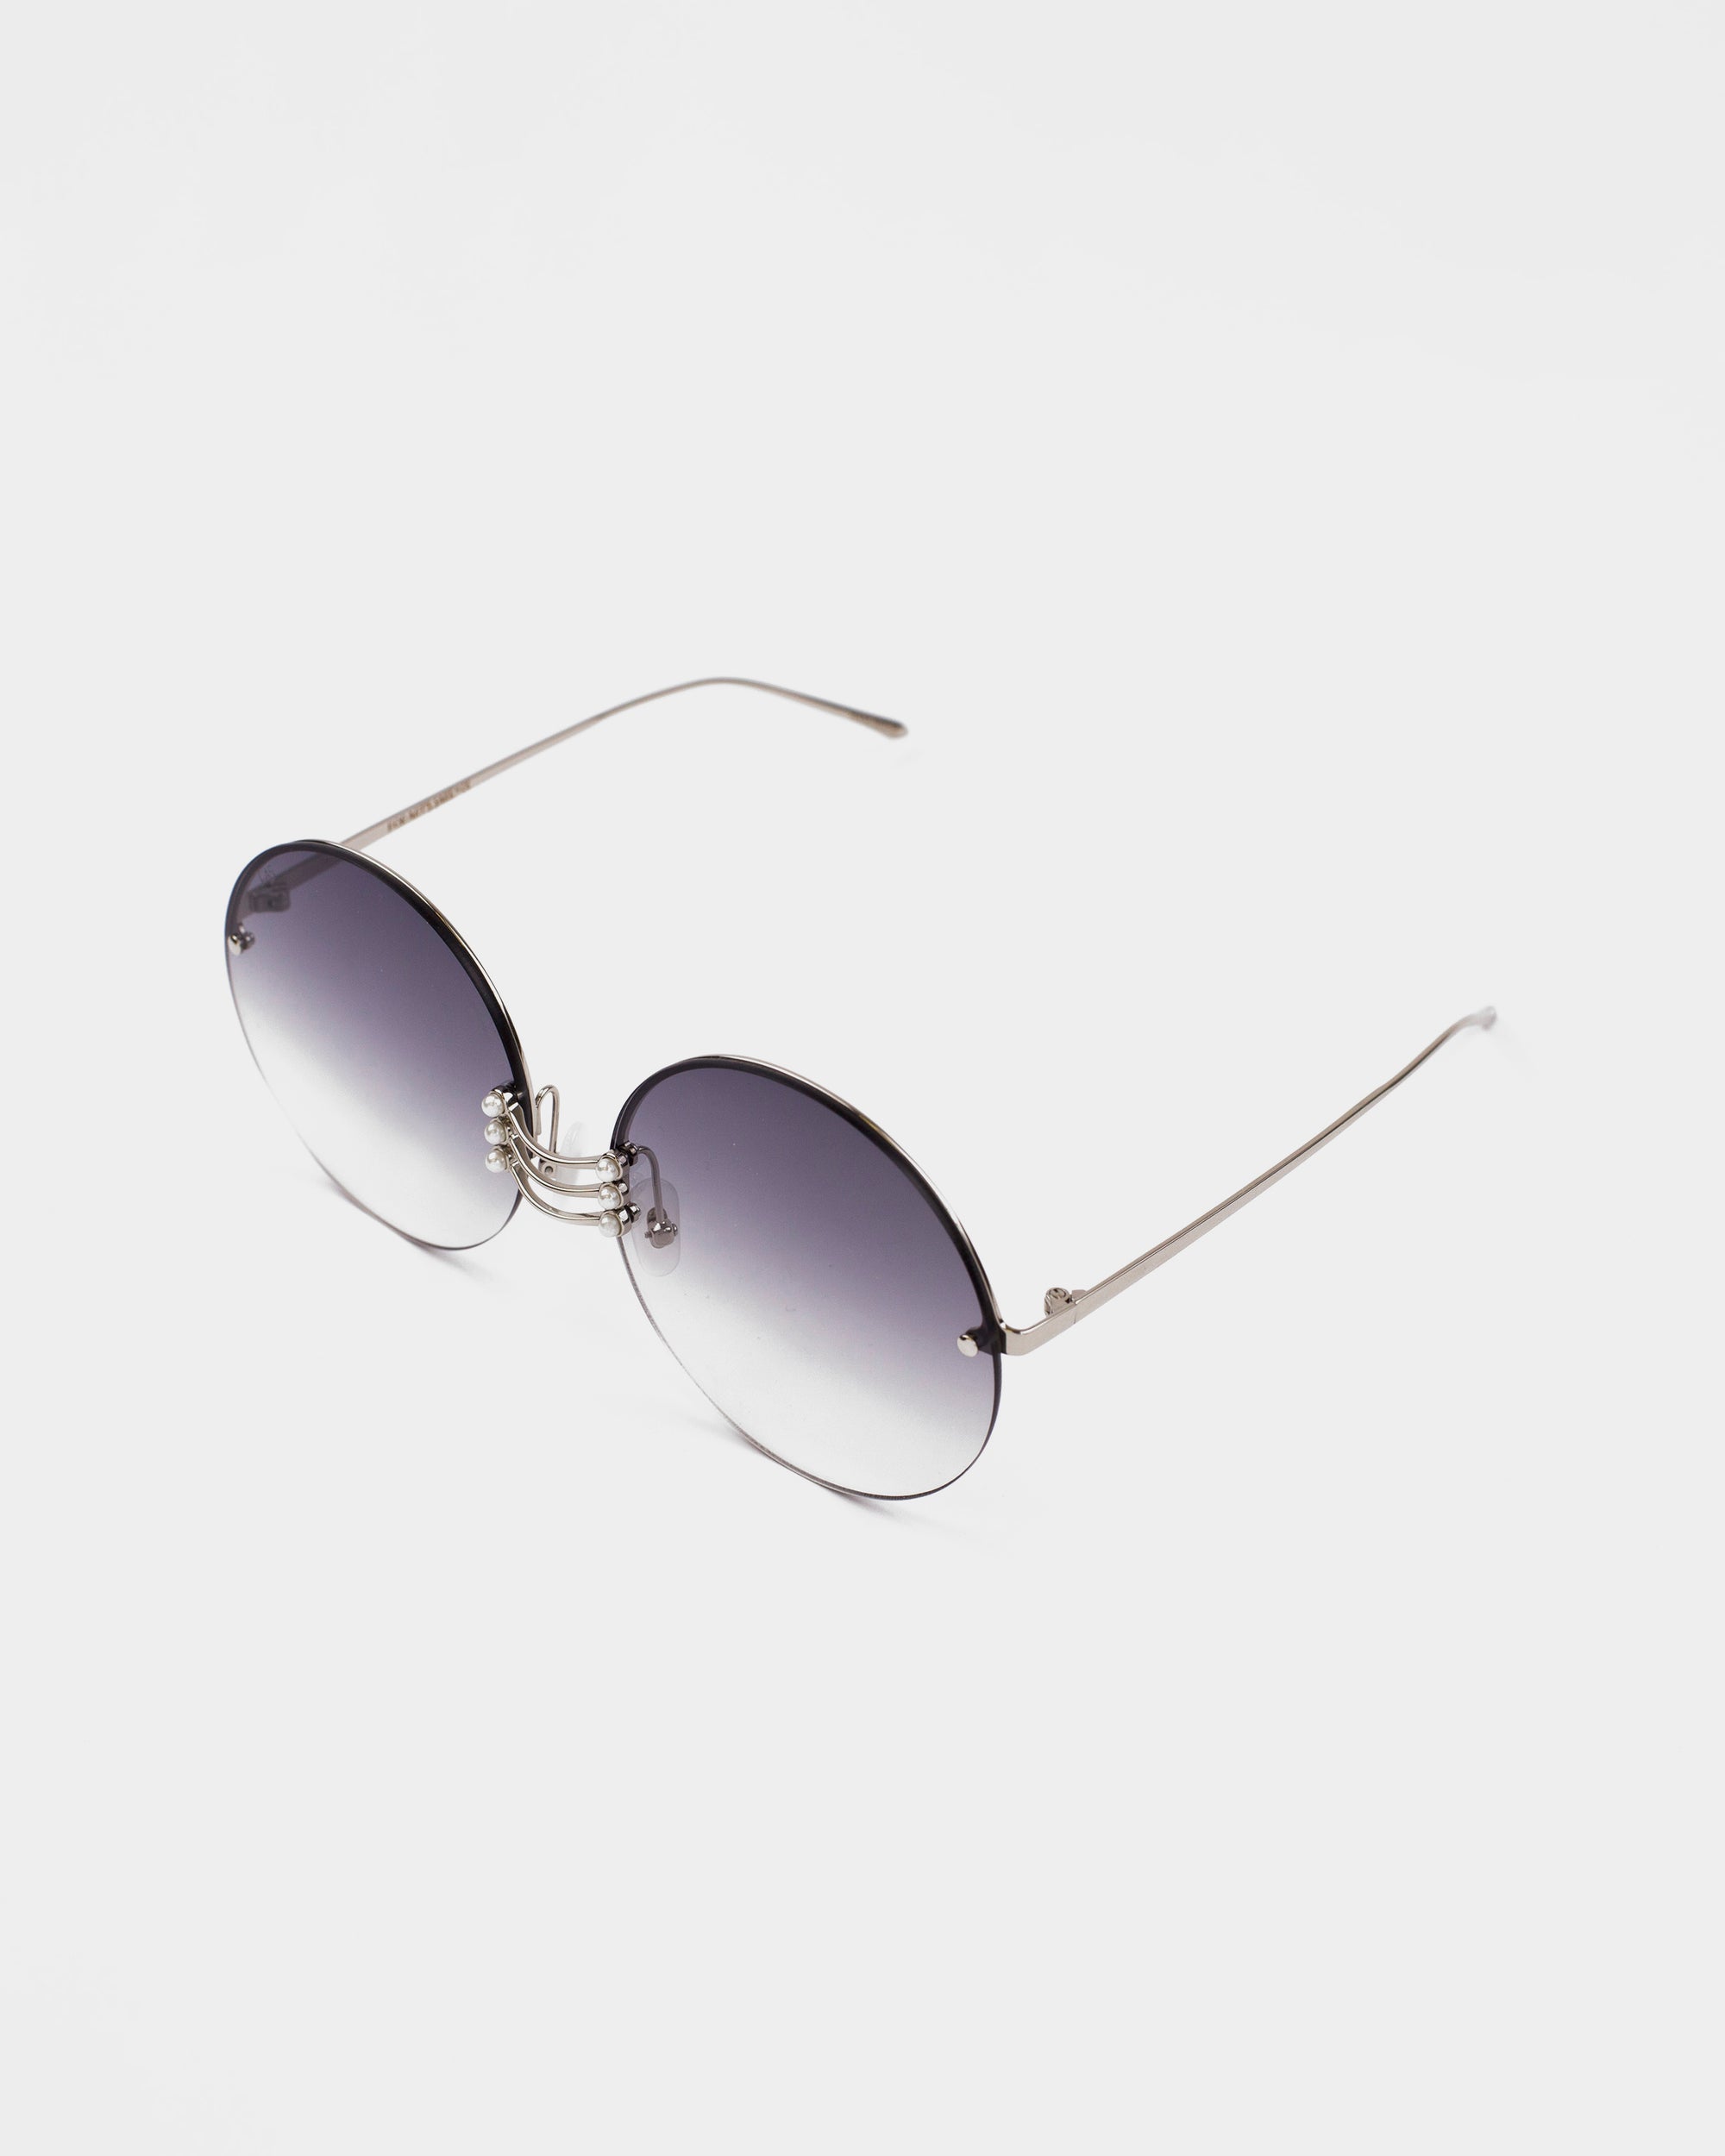 A pair of Vermeer sunglasses by For Art&#39;s Sake® with dark grey gradient lenses and thin stainless steel frames. The sunglasses are positioned on a white background, displayed at a slight angle. The UV protection lenses ensure comfort, while the gemstone nose pads add a touch of elegance.